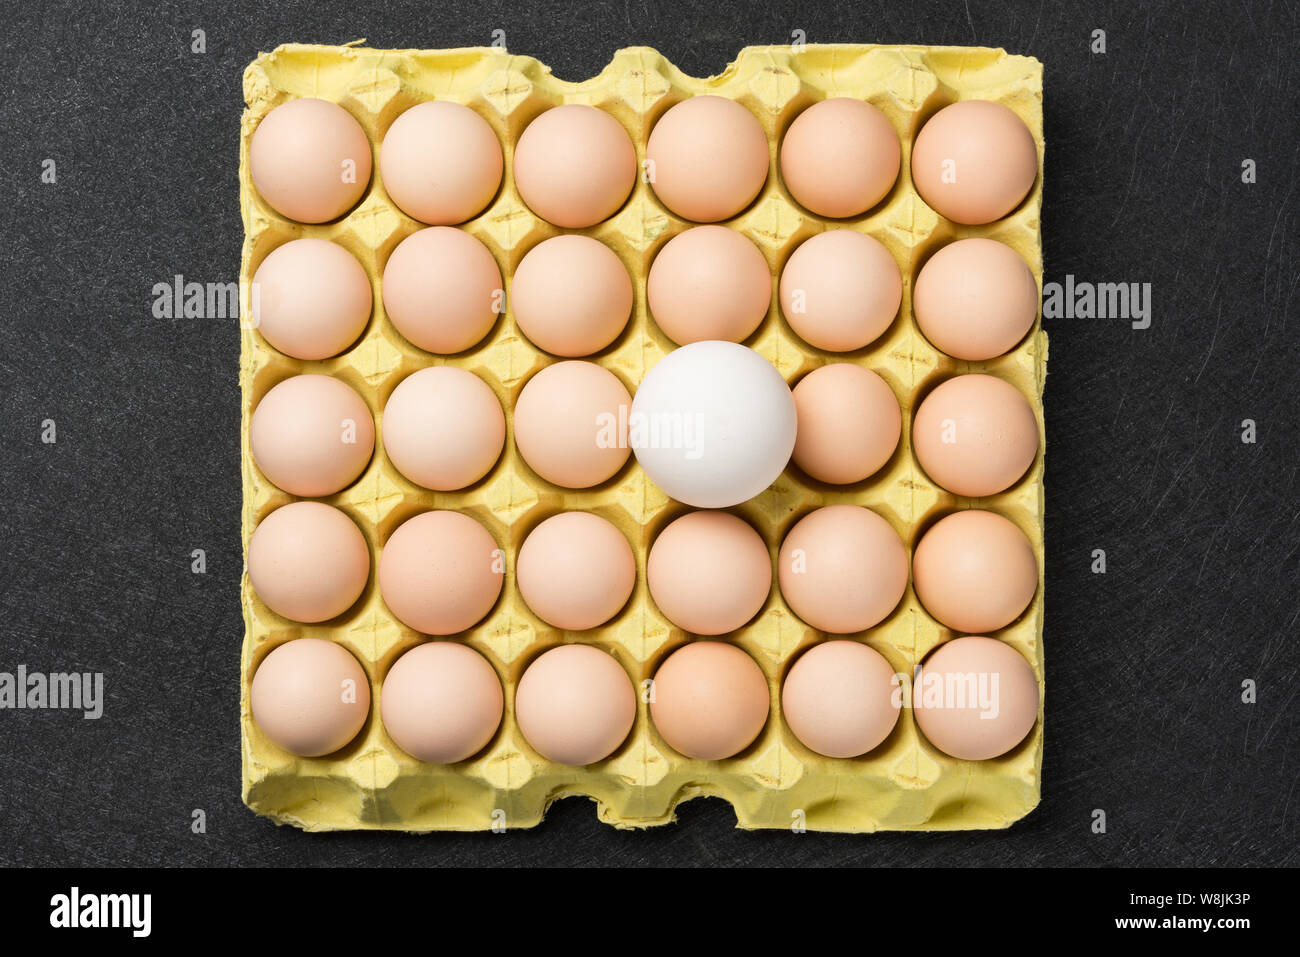 giant size goose egg between small chicken eggs concept of size comparison Stock Photo